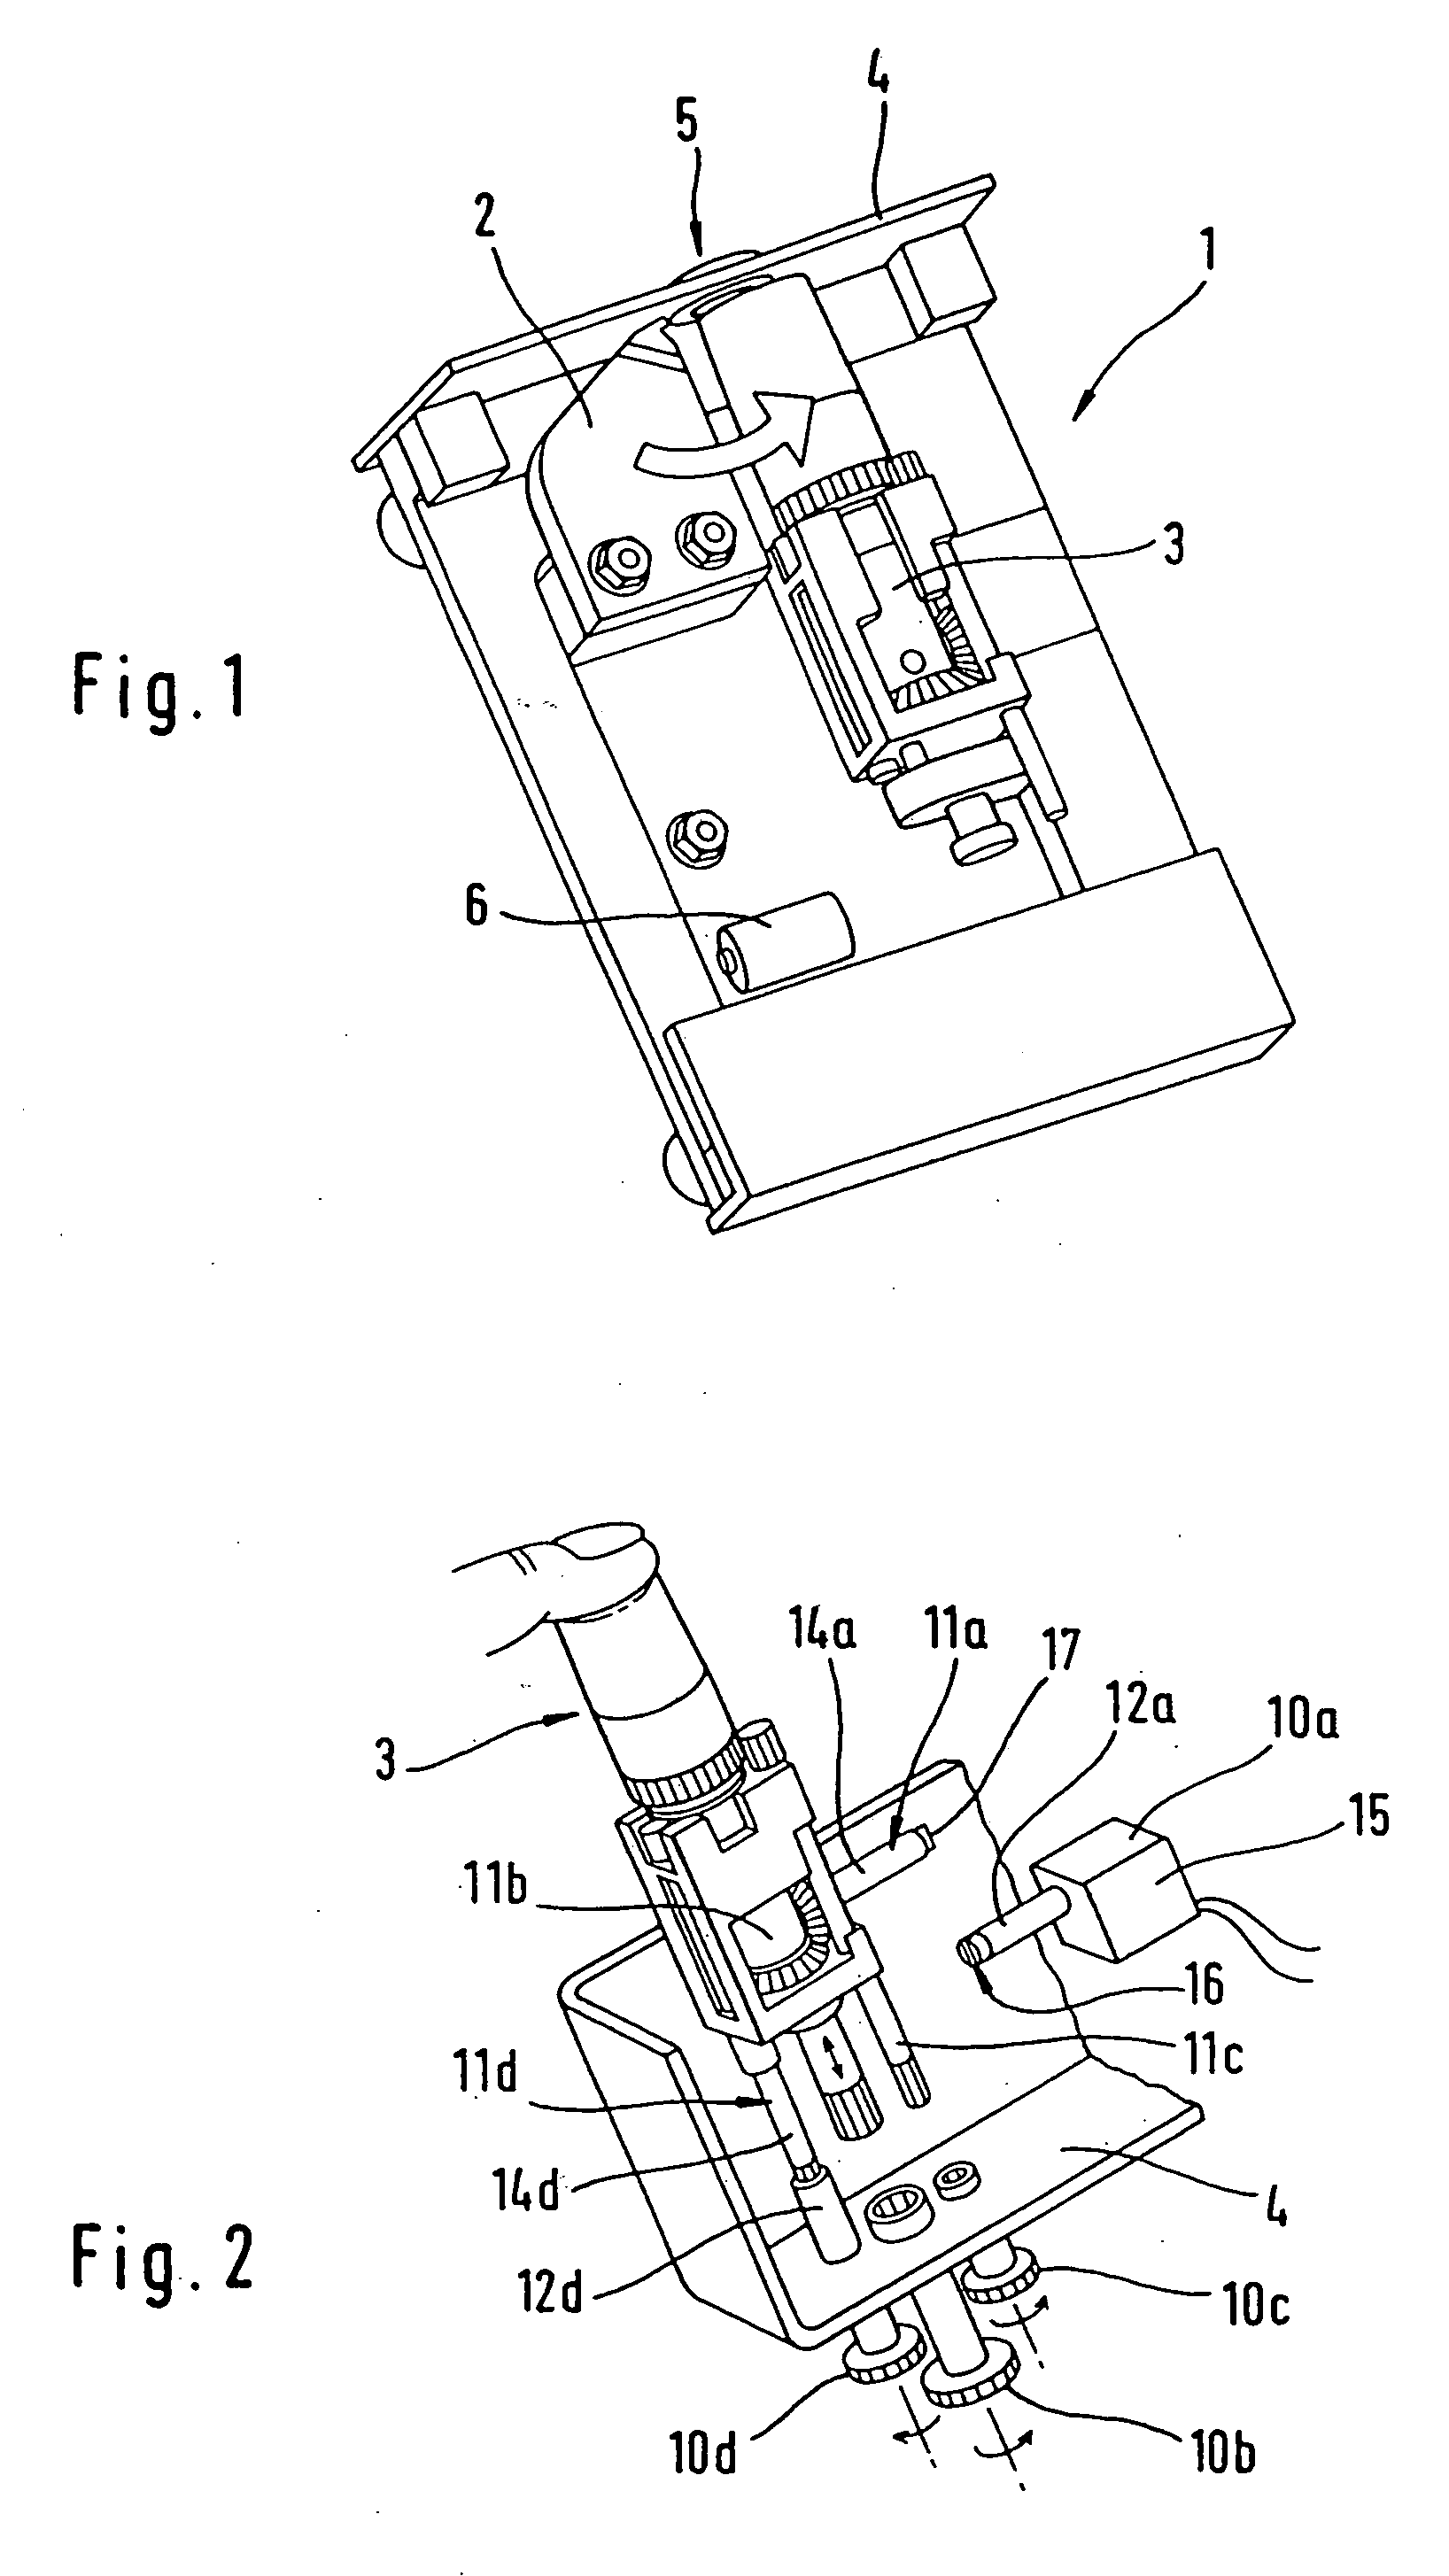 Hand-held instrument for the analysis of body fluids